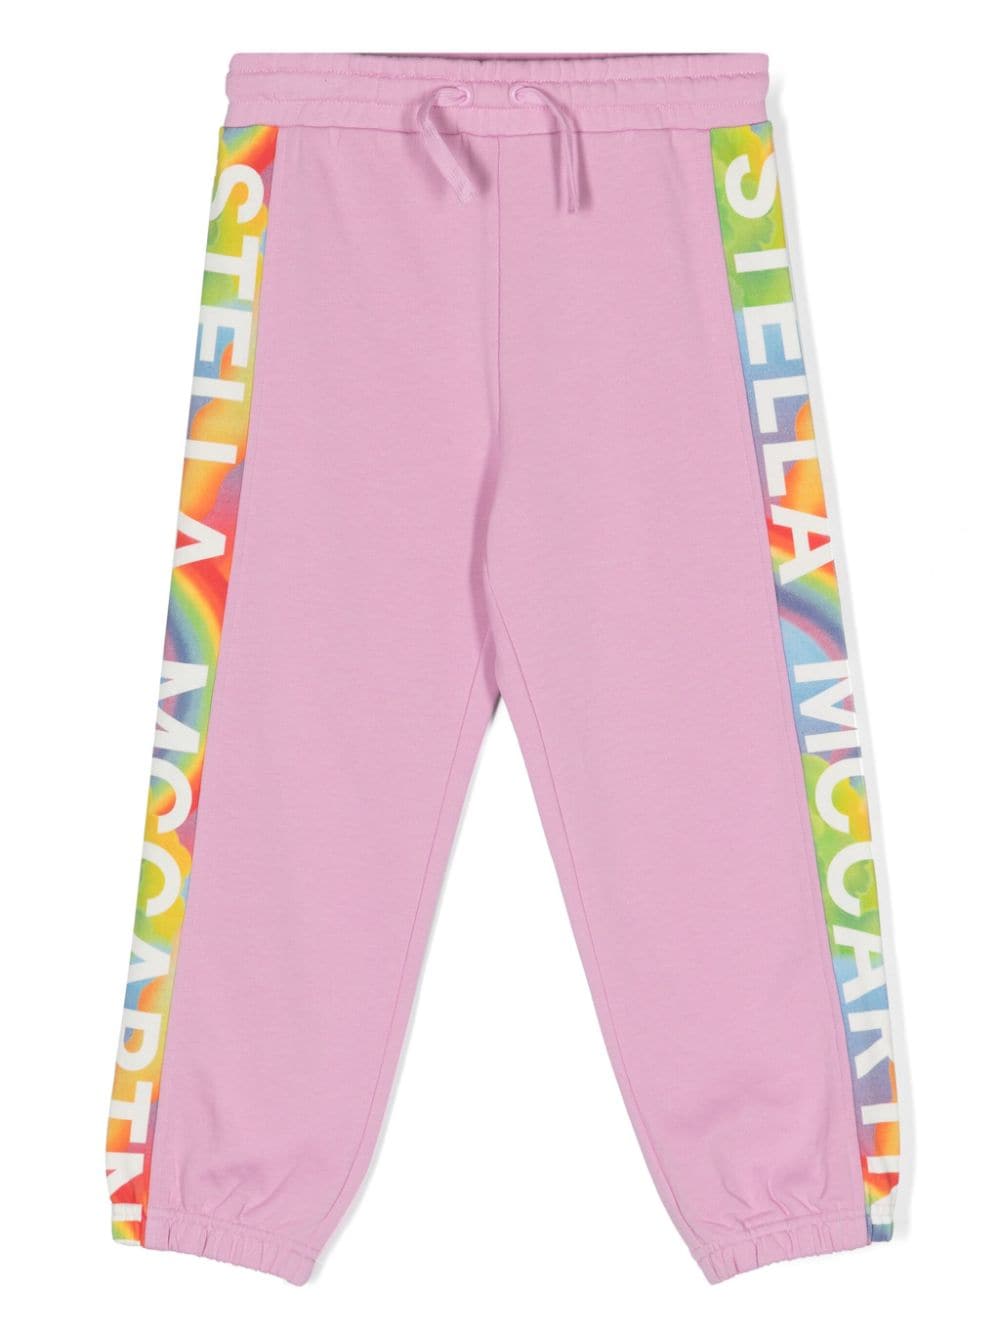 Bubblegum red sports trousers for girls